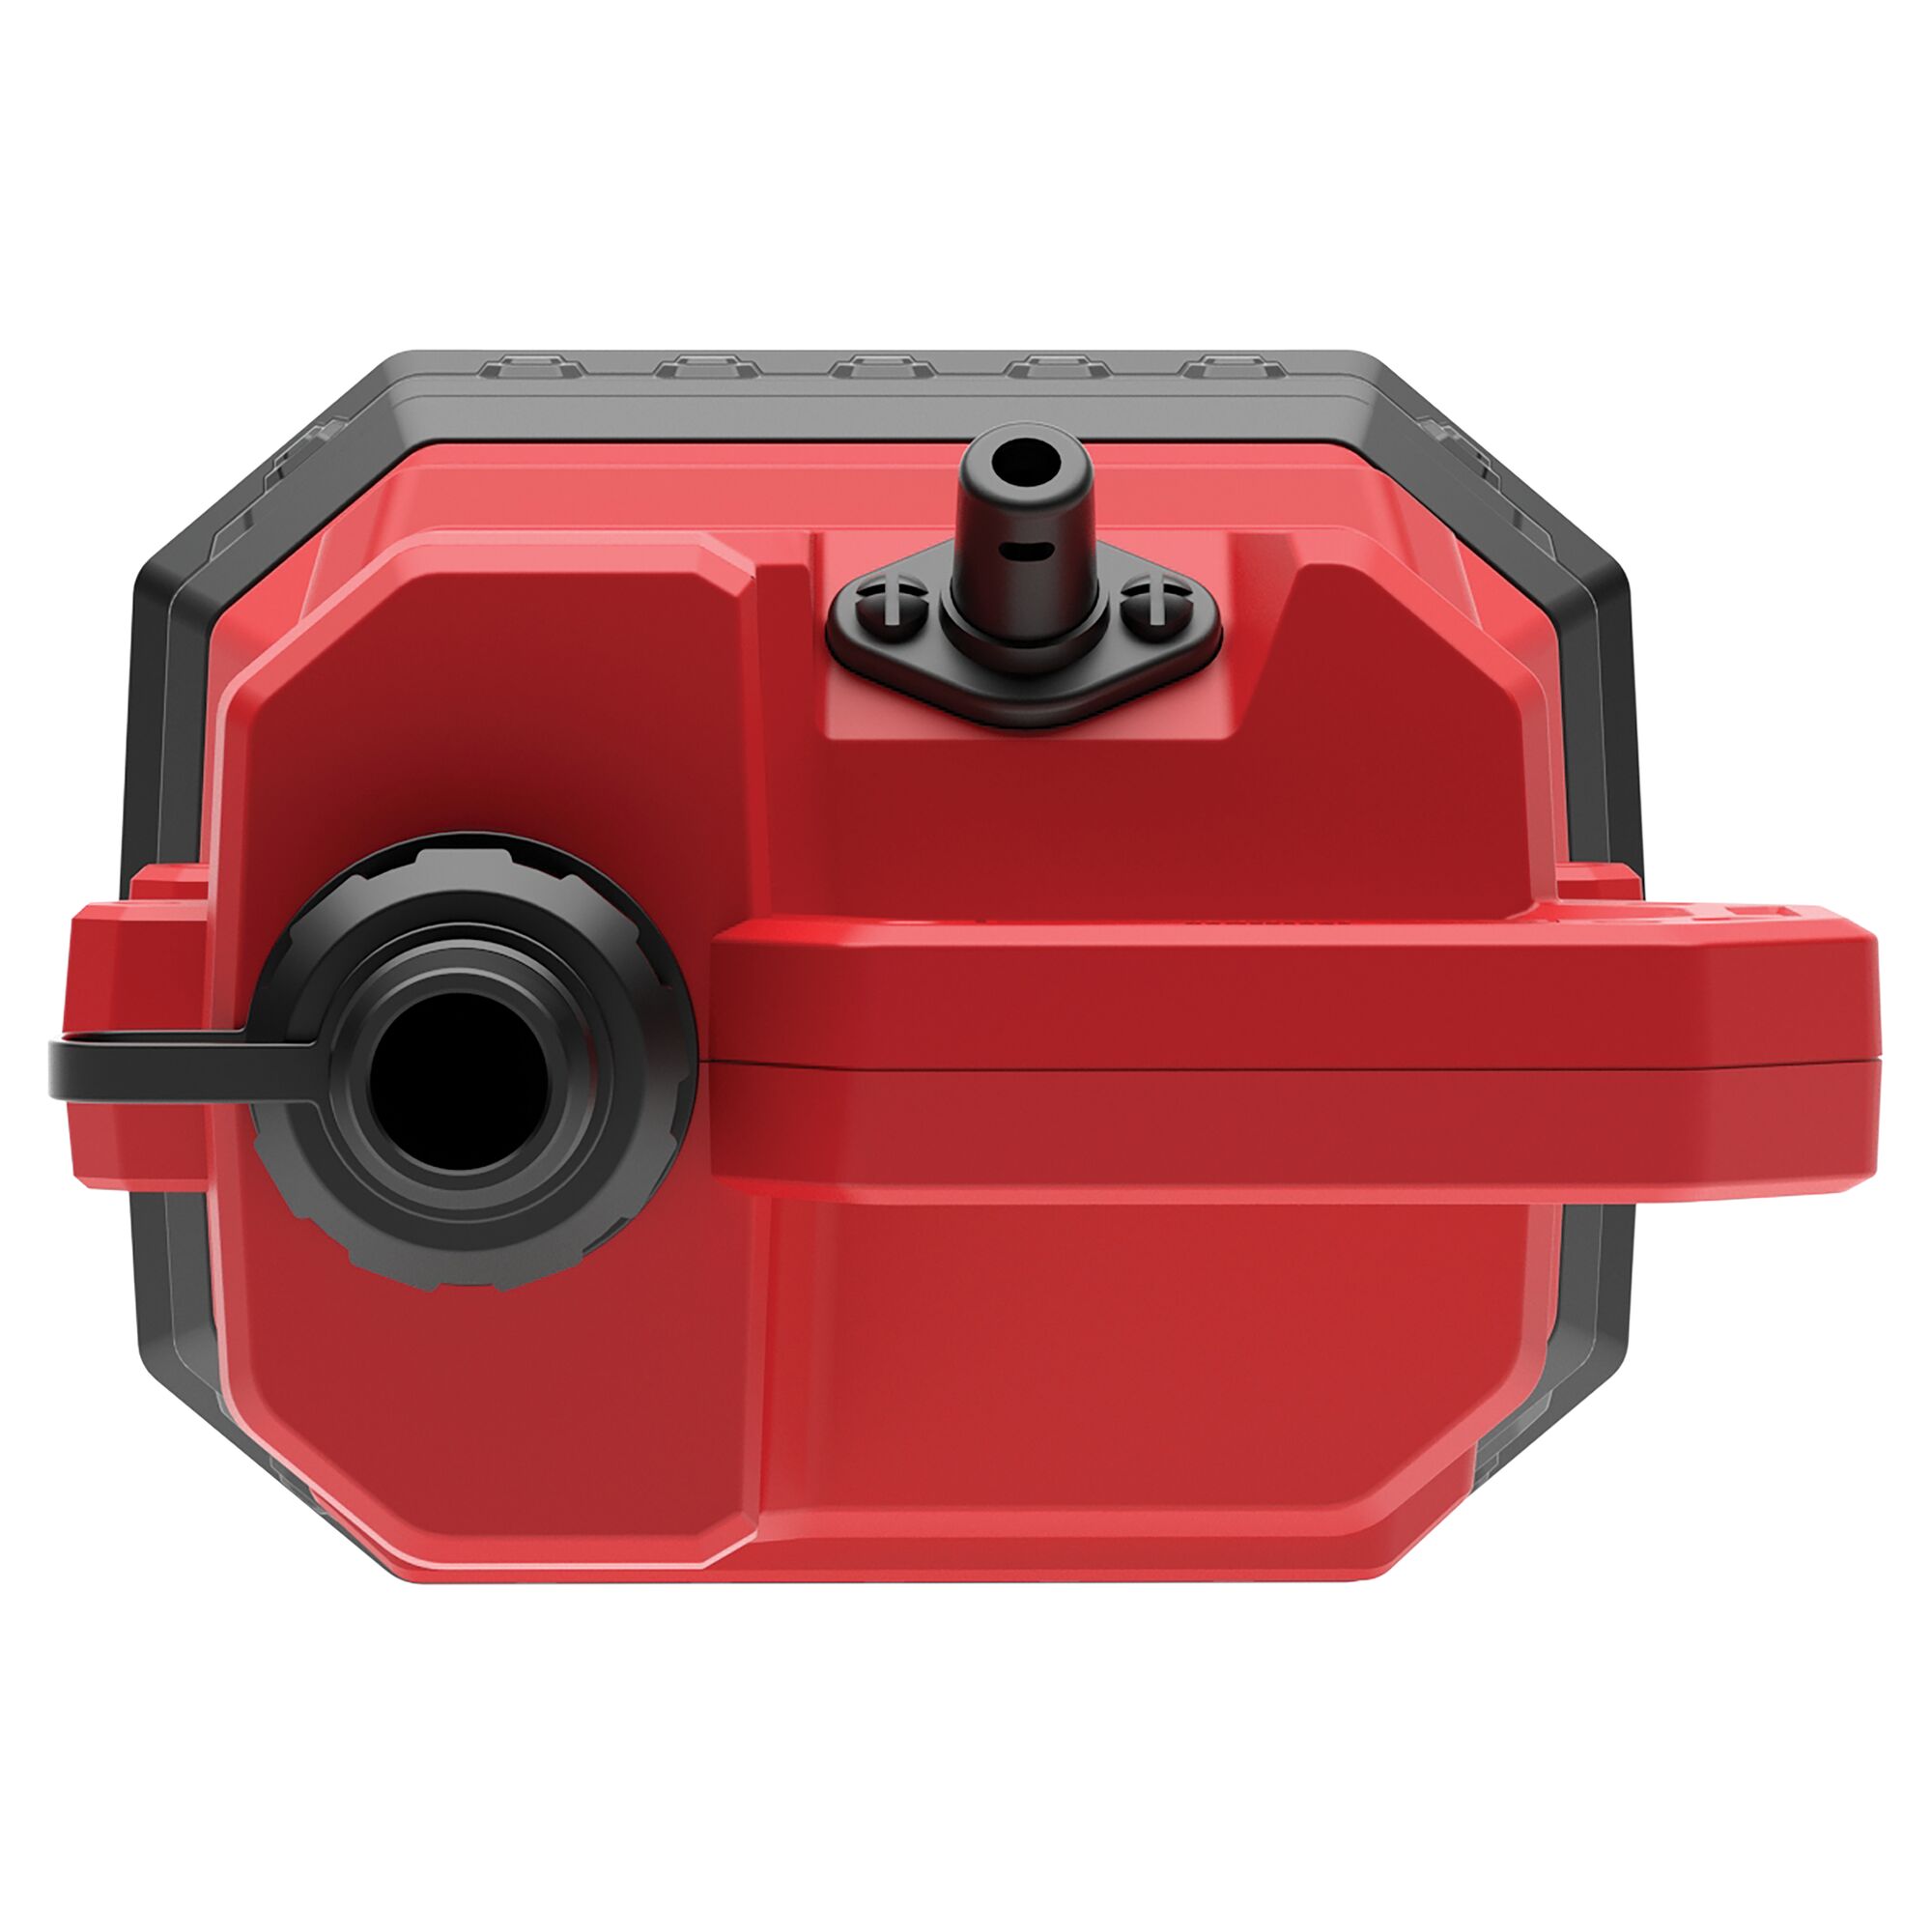 1-4HP WATER/UTILITY PUMP REINFORCED THERMOPLASTIC SUBMERSIBLE WITH GARDEN HOSE ADAPTER TOP VIEW